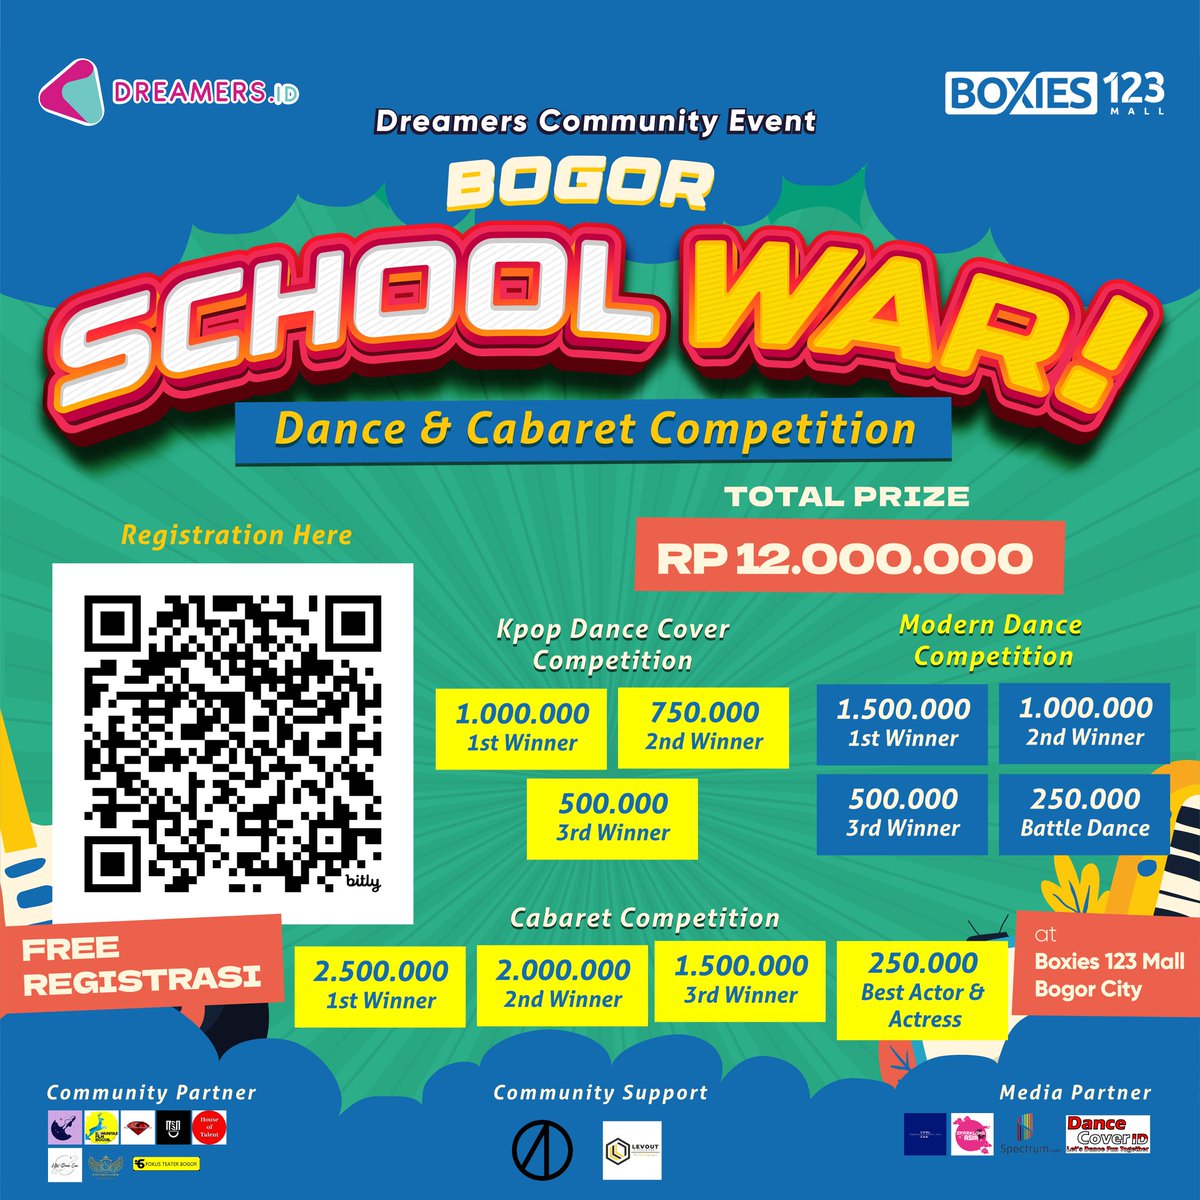 Are you ready to join BOGOR SCHOOL WAR? Time to register yourself and your team to join the competitions! Register yourself at 🔗 msha.ke/dreamersevent or scan the QR code in the pic. Join now and get a chance to win a total prize of IDR12.000.000! See you! 💙